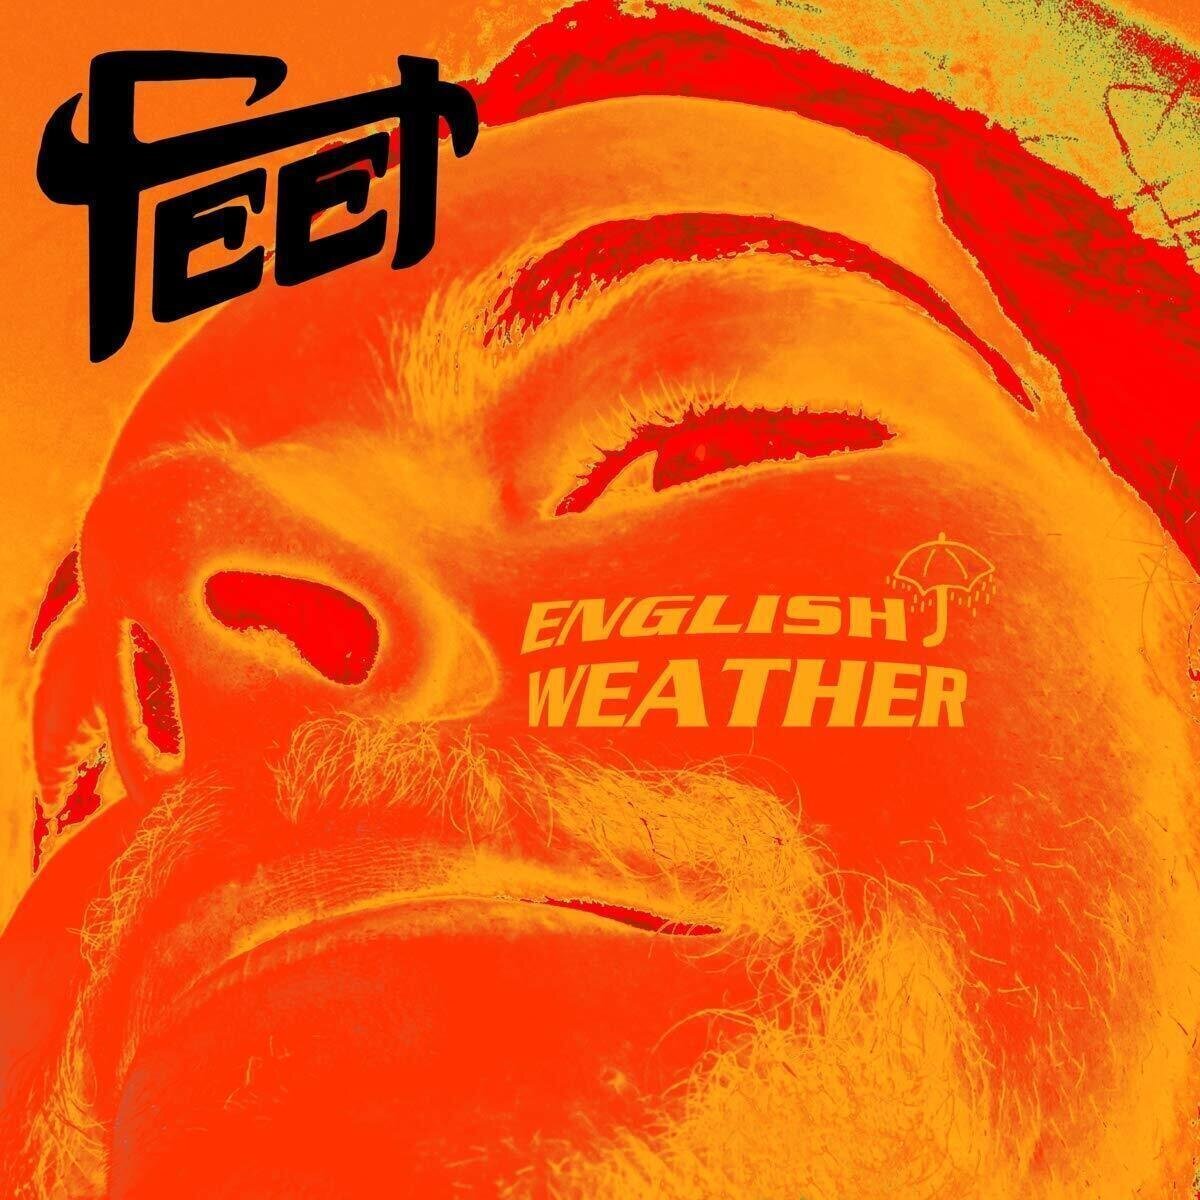 Vinyl Record Feet - English Weather (Picture Disc) (LP)